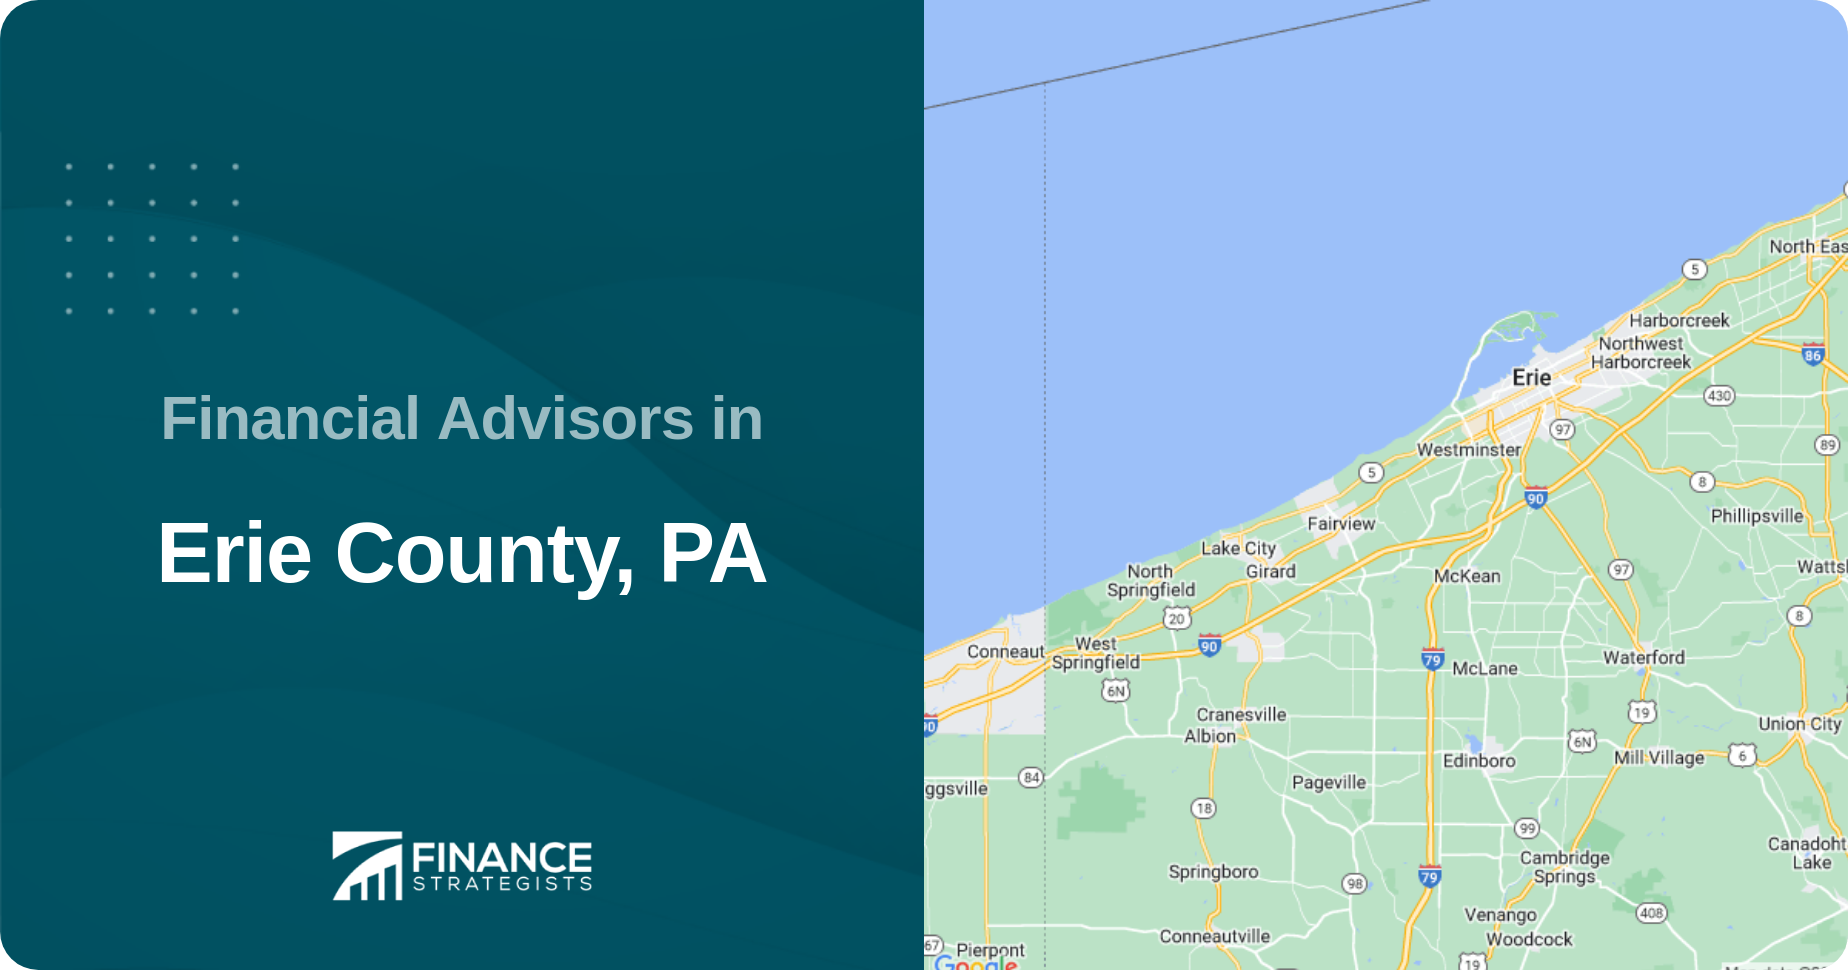 Financial Advisors in Erie County, PA